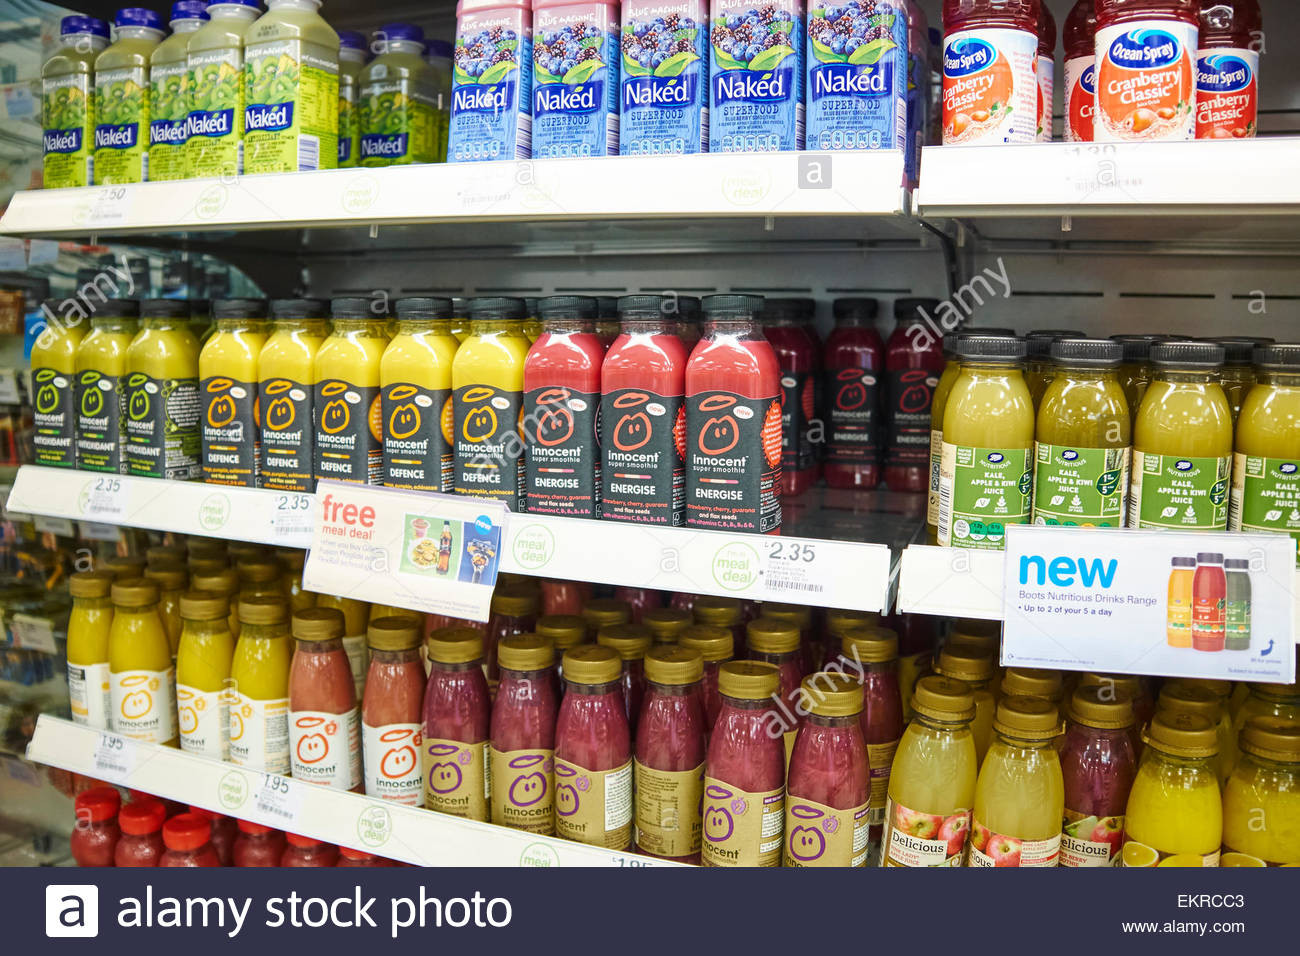 Healthy Smoothies In Stores
 Healthy Fruit Juice And Smoothie Drinks Display At